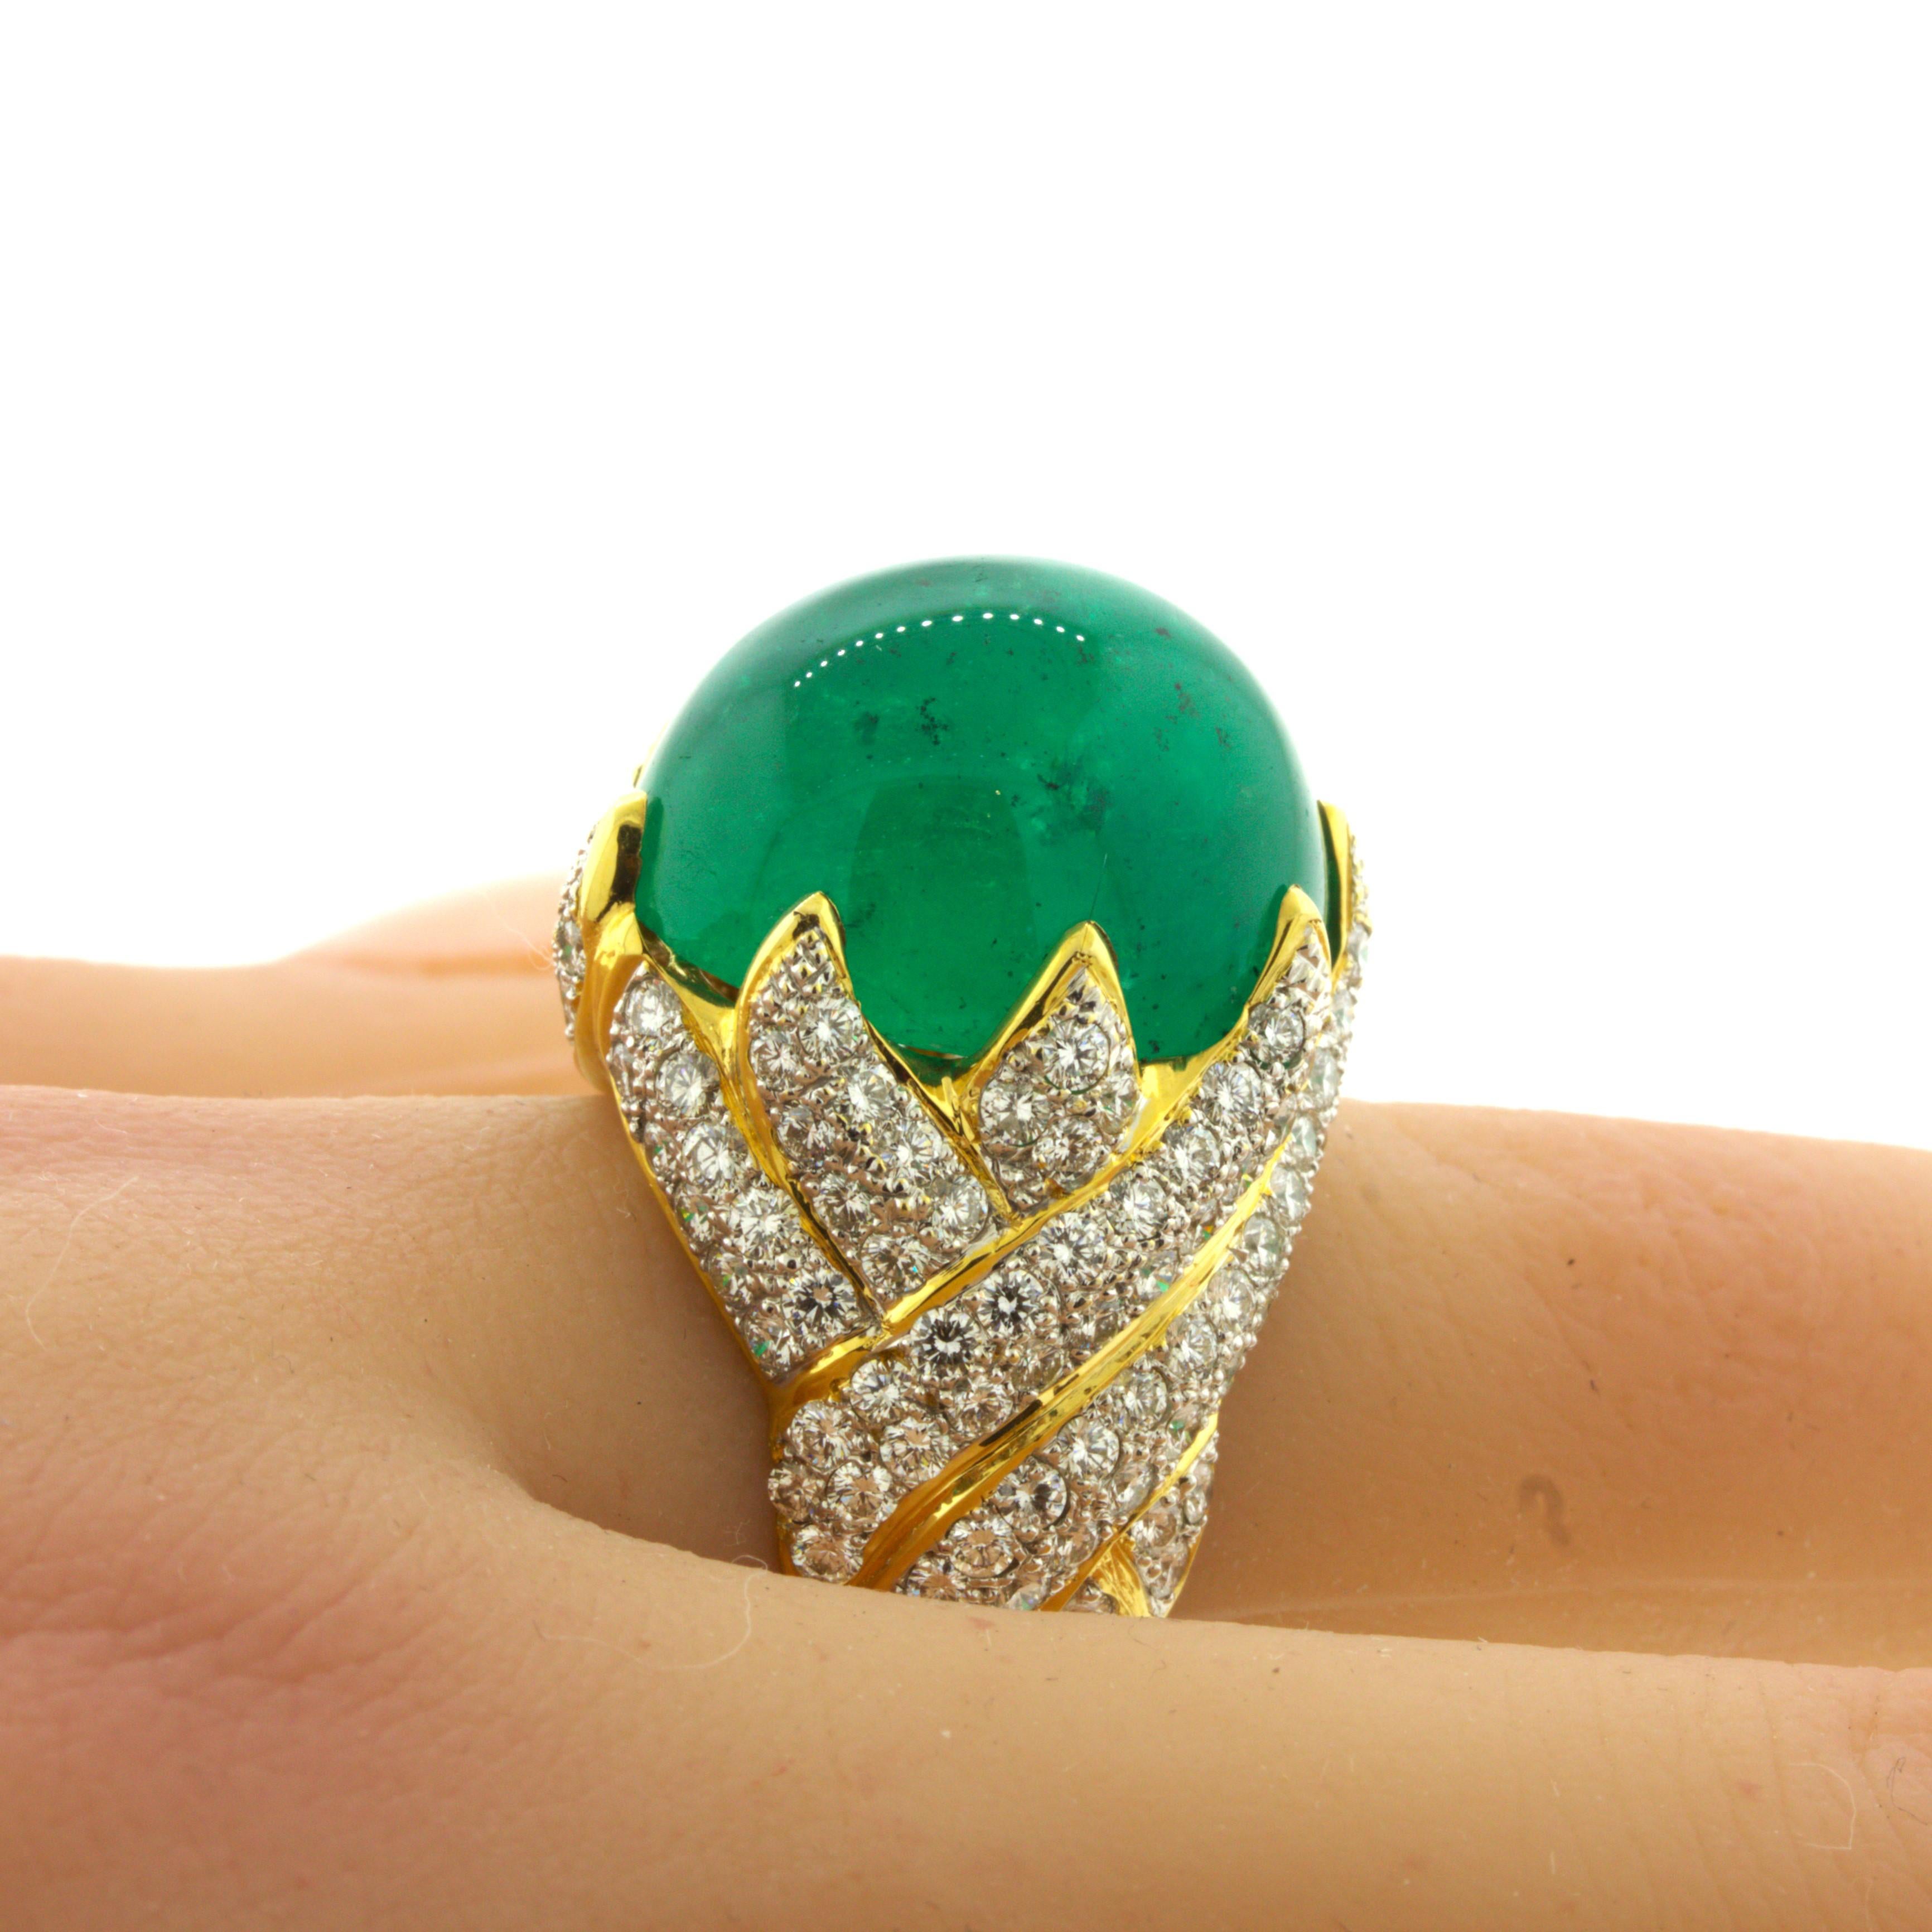 26.67 Carat Colombian Emerald Diamond 18K Yellow Gold Cocktail Ring, AGL Cert. For Sale 2